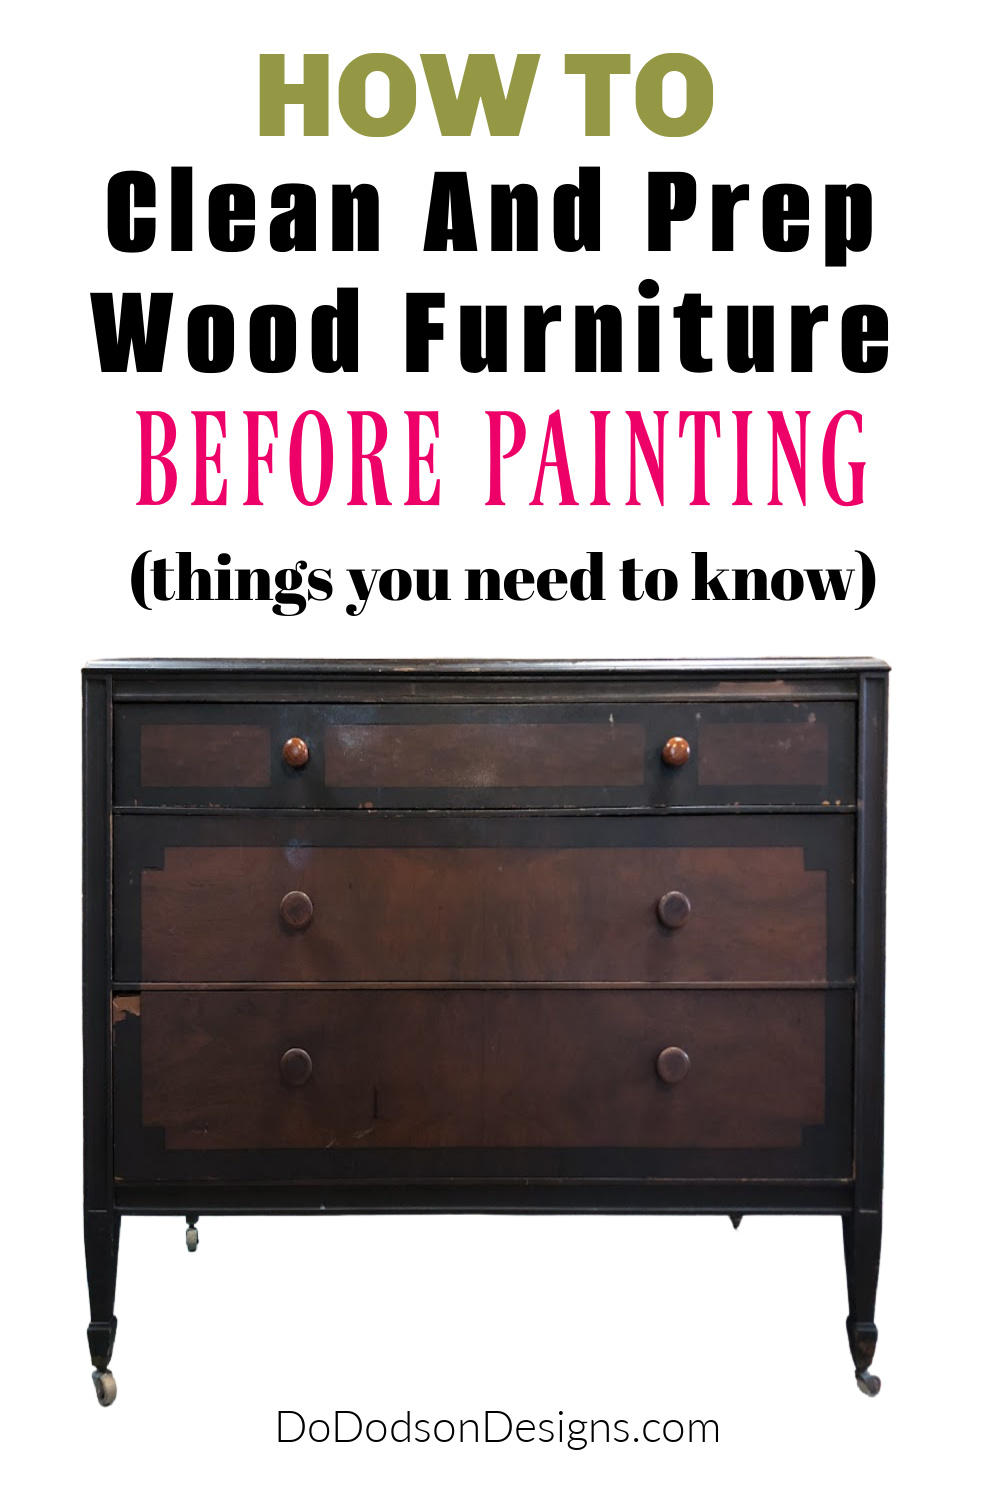 How To Clean And Prep Wood Furniture Before Painting